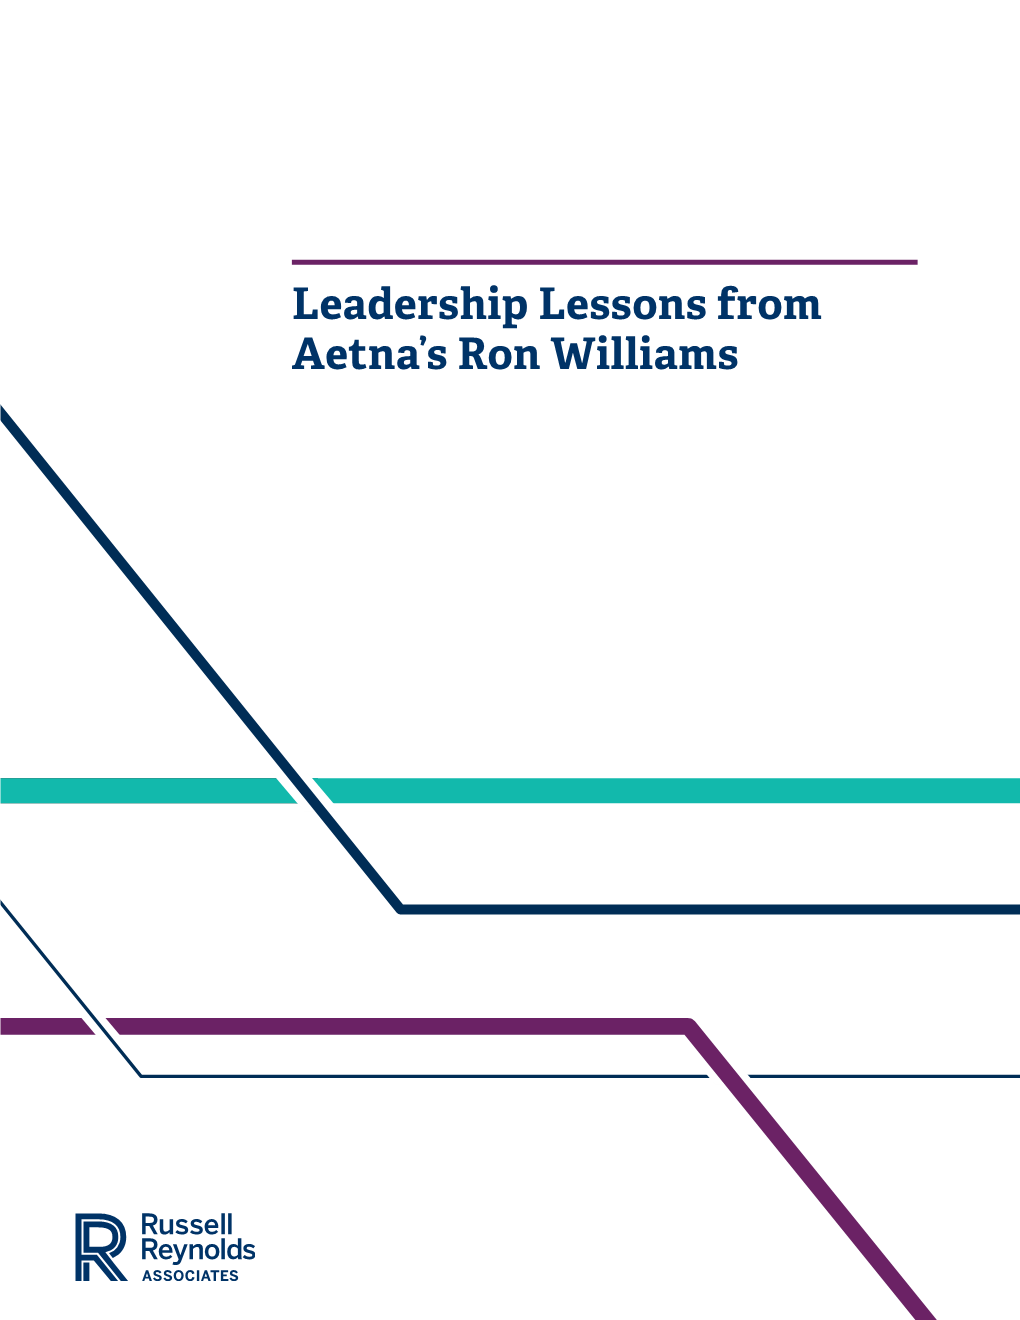 Leadership Lessons from Aetna's Ron Williams